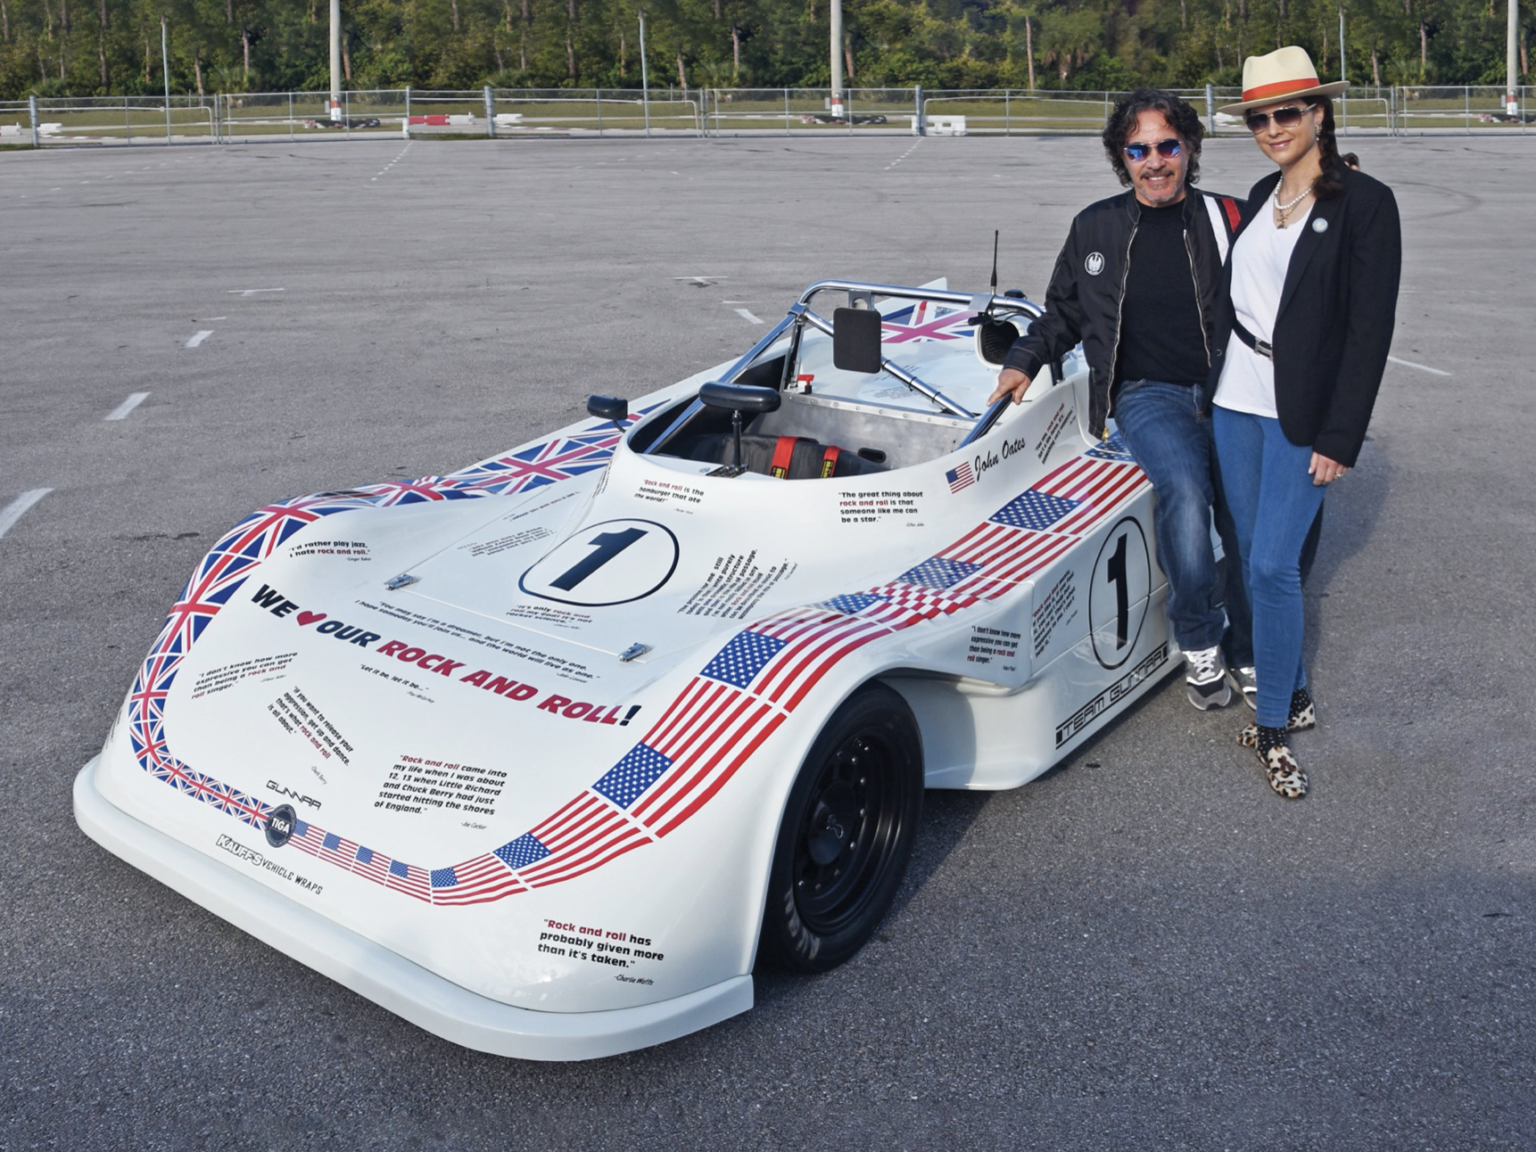 To celebrate the 25th anniversary of the Amelia Island Concours d'Elegance, rocker John Oates donated the proceeds from the sale of his 1984 Tiga SC84 to the Amelia Island Concours d'Elegance Foundation.